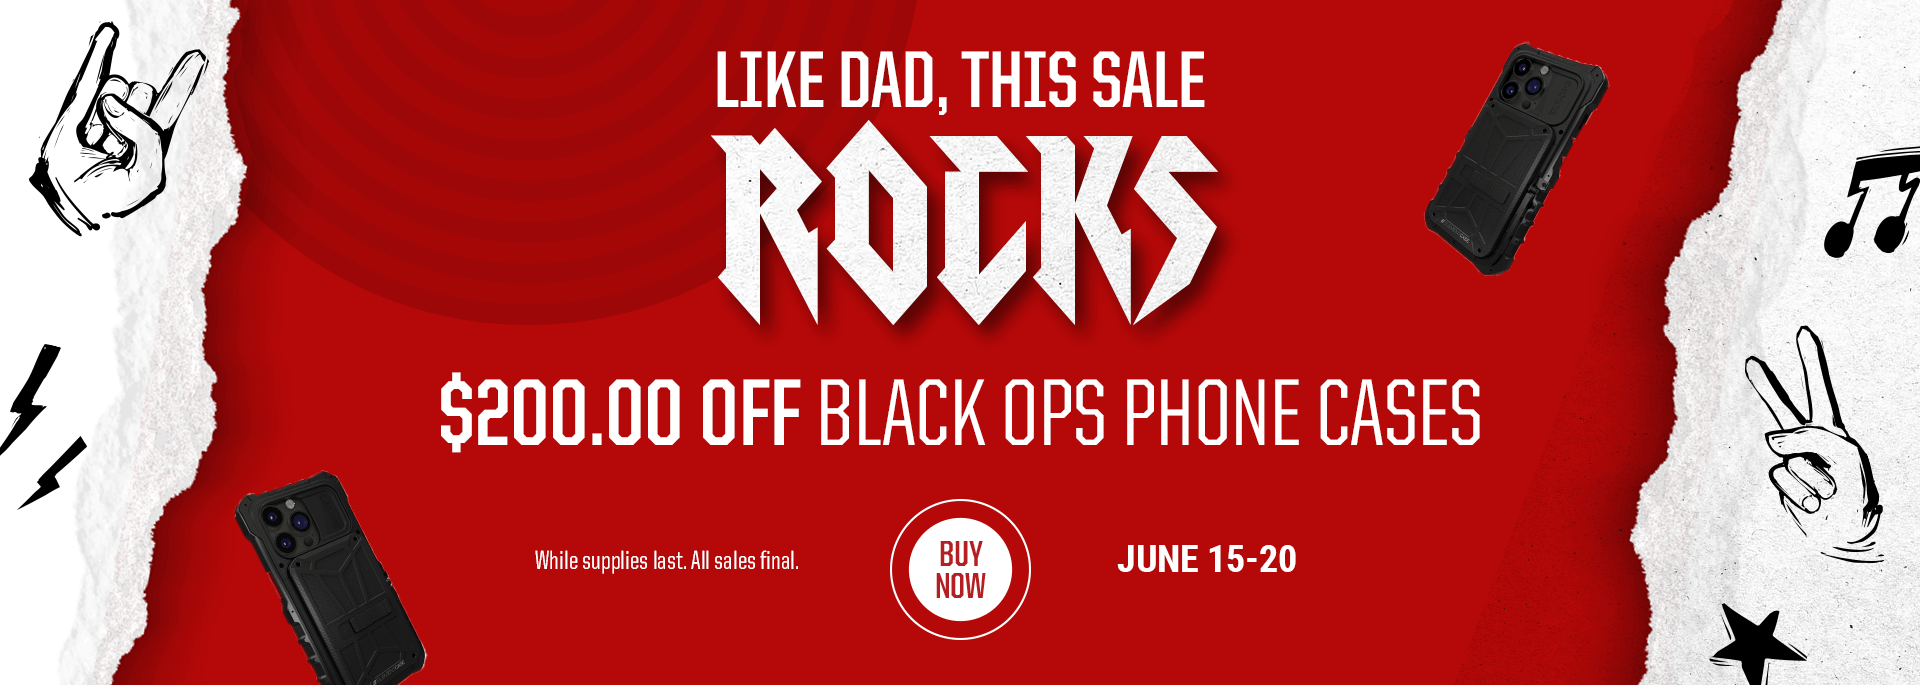 $200 Off Black OPS Phone Cases | June 15-20 | Father's Day